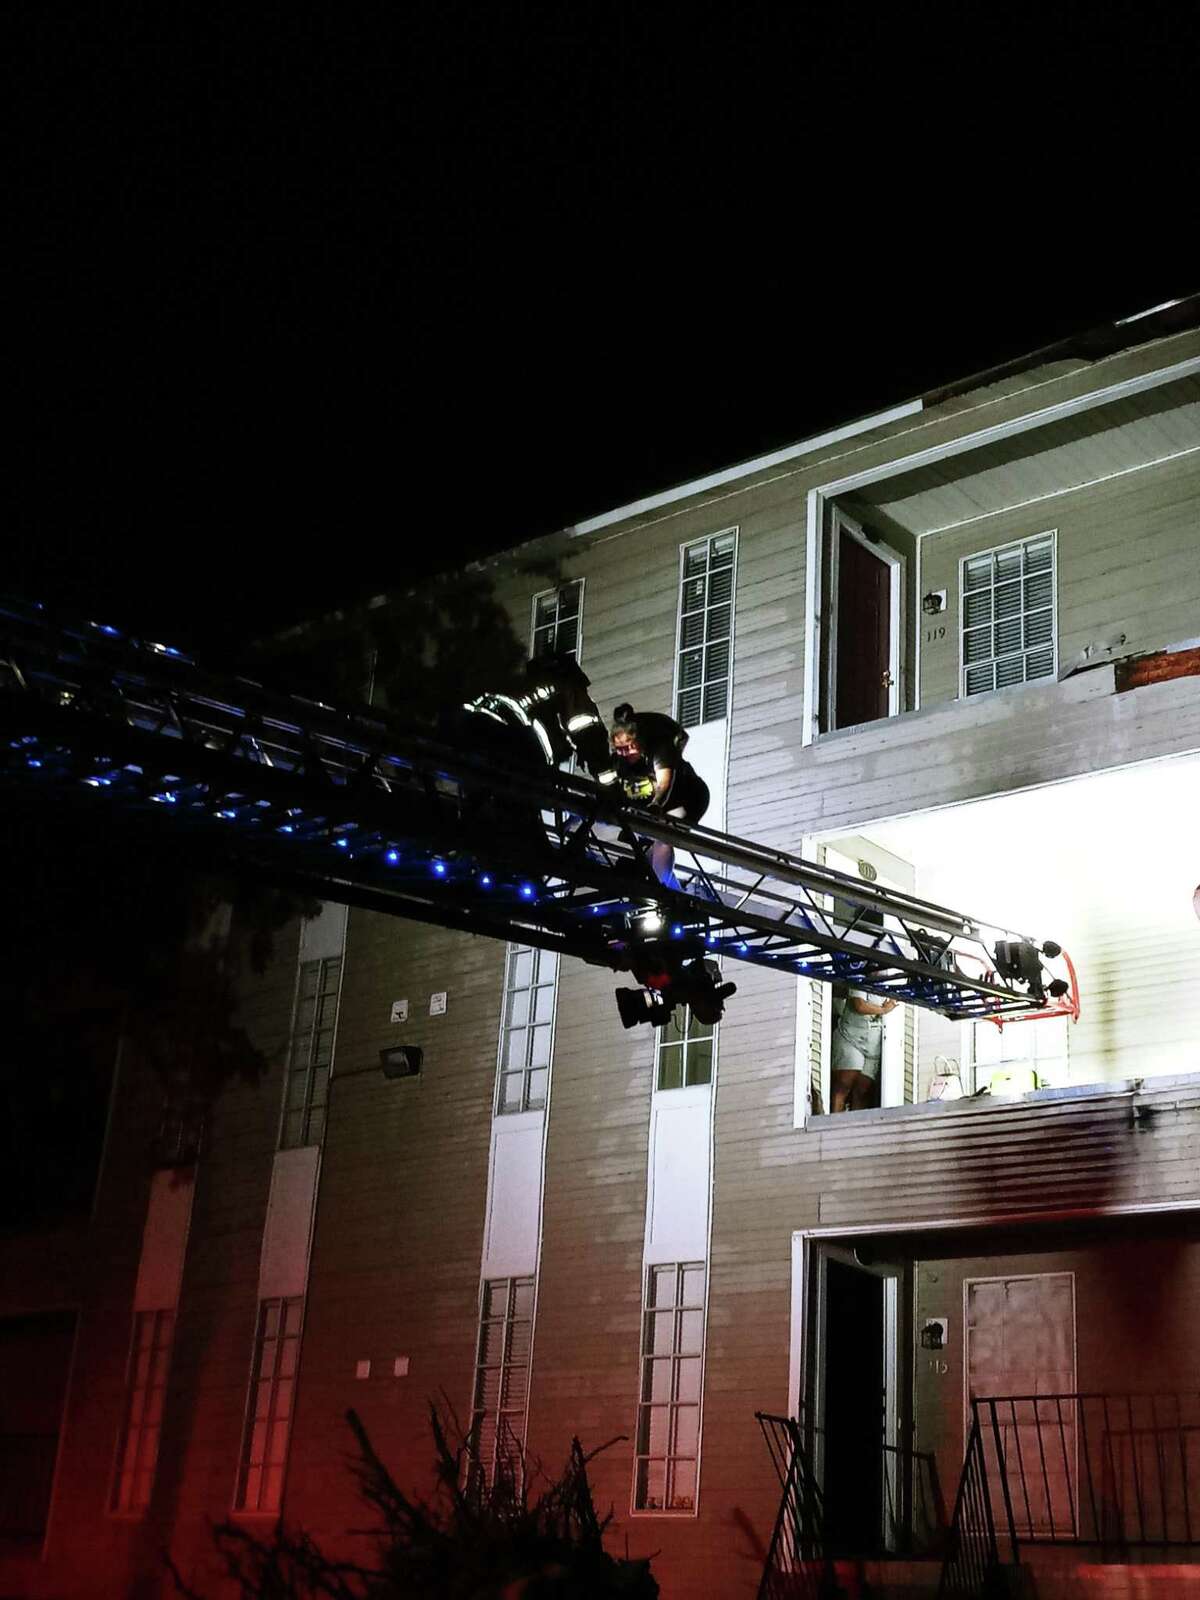 Spring Fire Department Ladder 74 C-Shift evacuated the 12 Serena Woods Apartments residents from their balconies after a falling tree crushed their outside stairwell on Sunday, July 10, 2022.